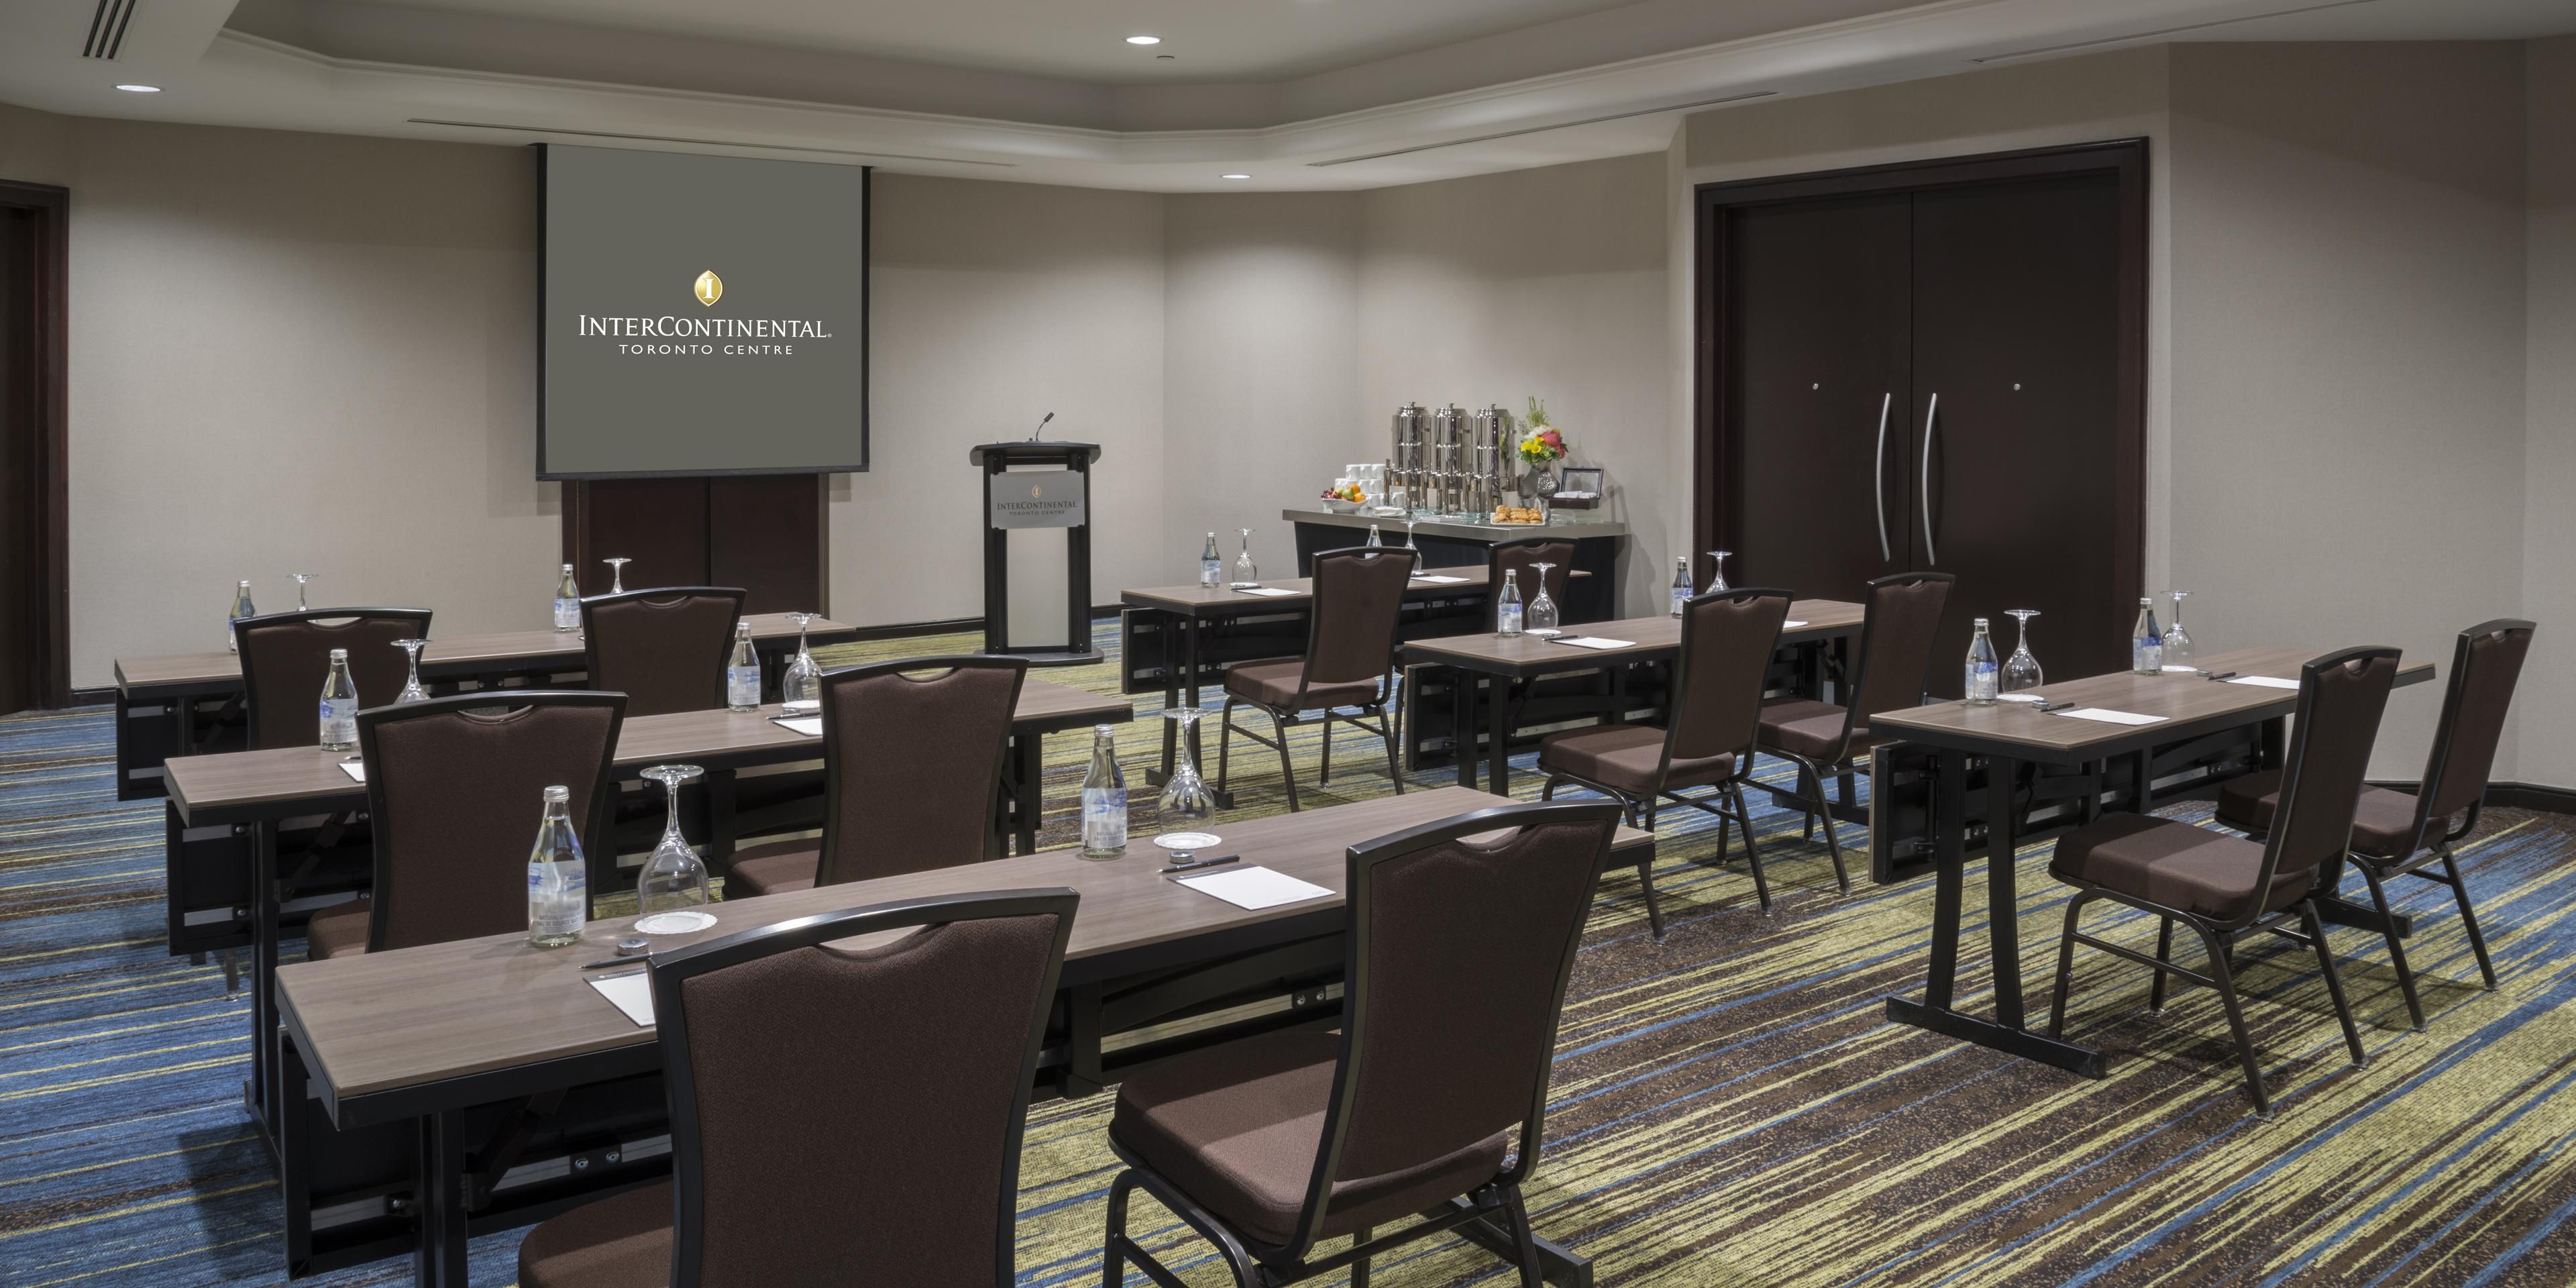 Planned by our dedicated teams with precise attention to detail, your event — whether personal or business-related — will exceed expectations. With an unrivalled location in downtown Toronto, our 18,000 square feet of versatile and luxurious space can accommodate gatherings from small meetings to conferences.